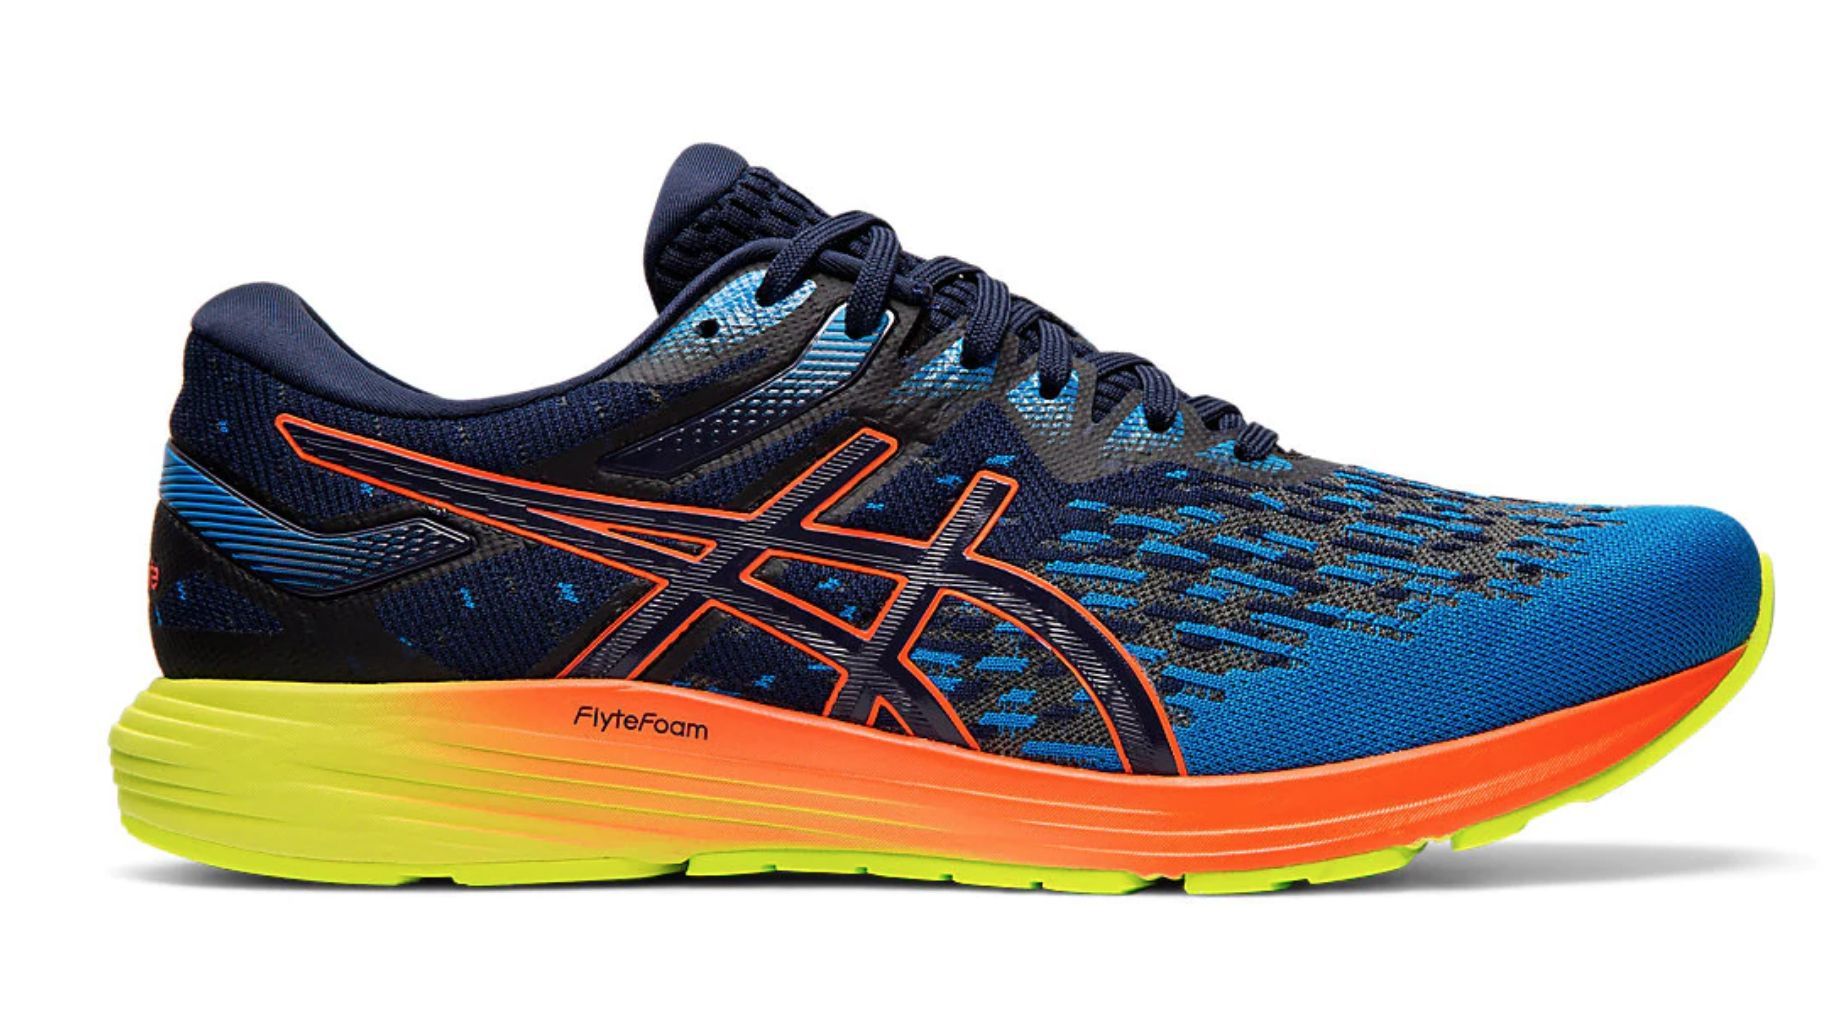 asics shoes with good arch support Off 79% 